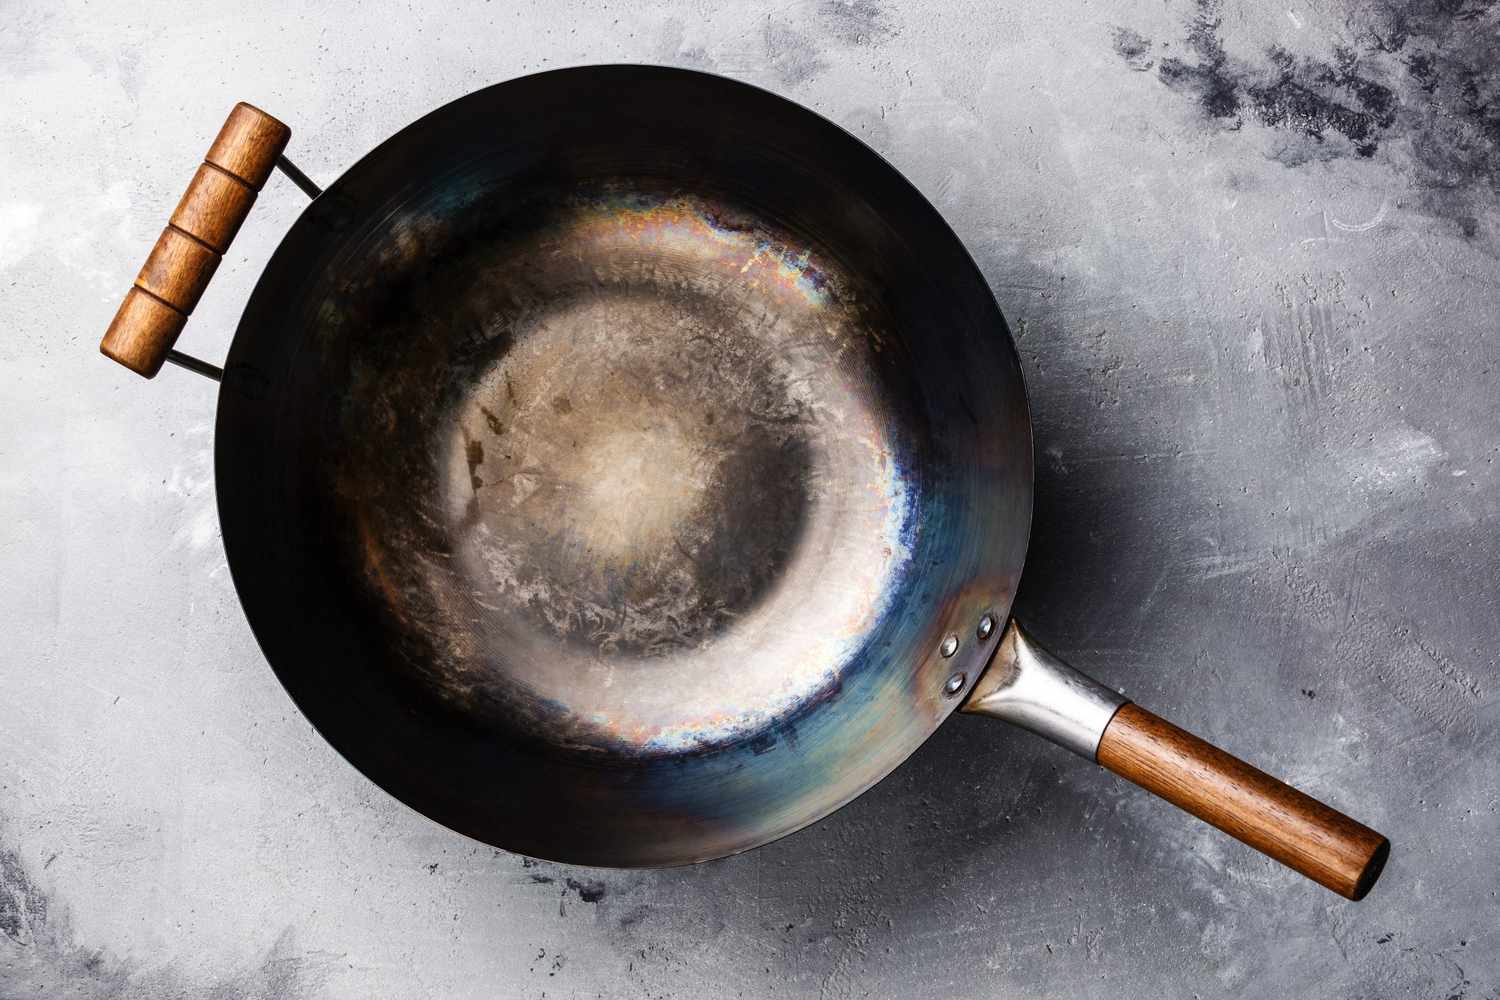 https://recipes.net/wp-content/uploads/2023/09/how-to-buy-season-and-care-for-a-wok-1694936498.jpg